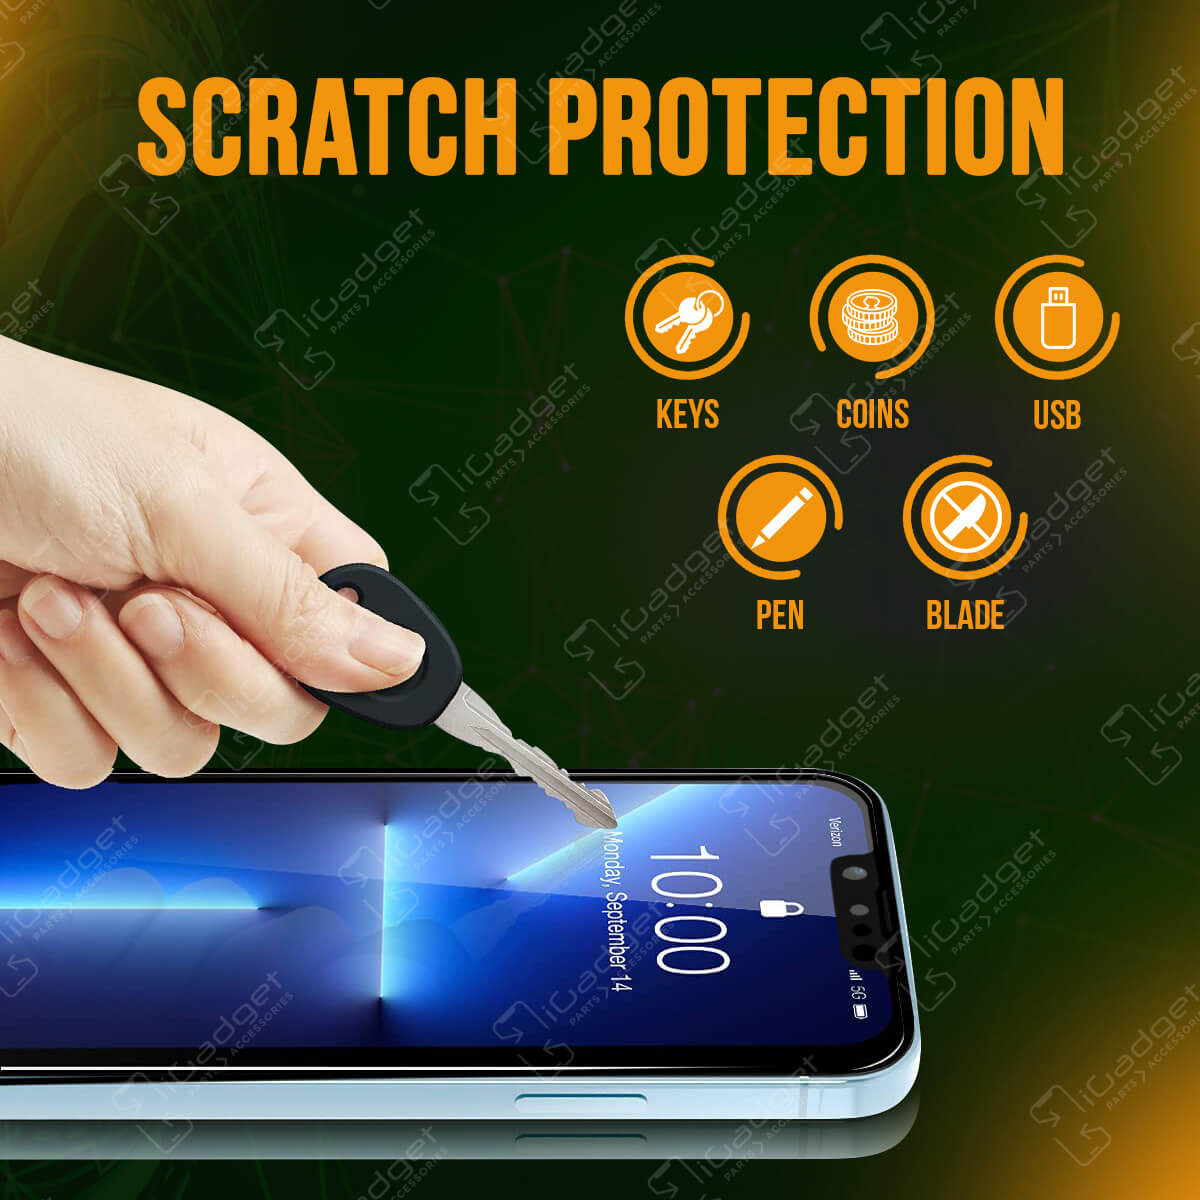 iPhone X/iPhone XS/iPhone 11 Pro Glass Screen Protector 3D Gummed Privacy Tint | Full Coverage